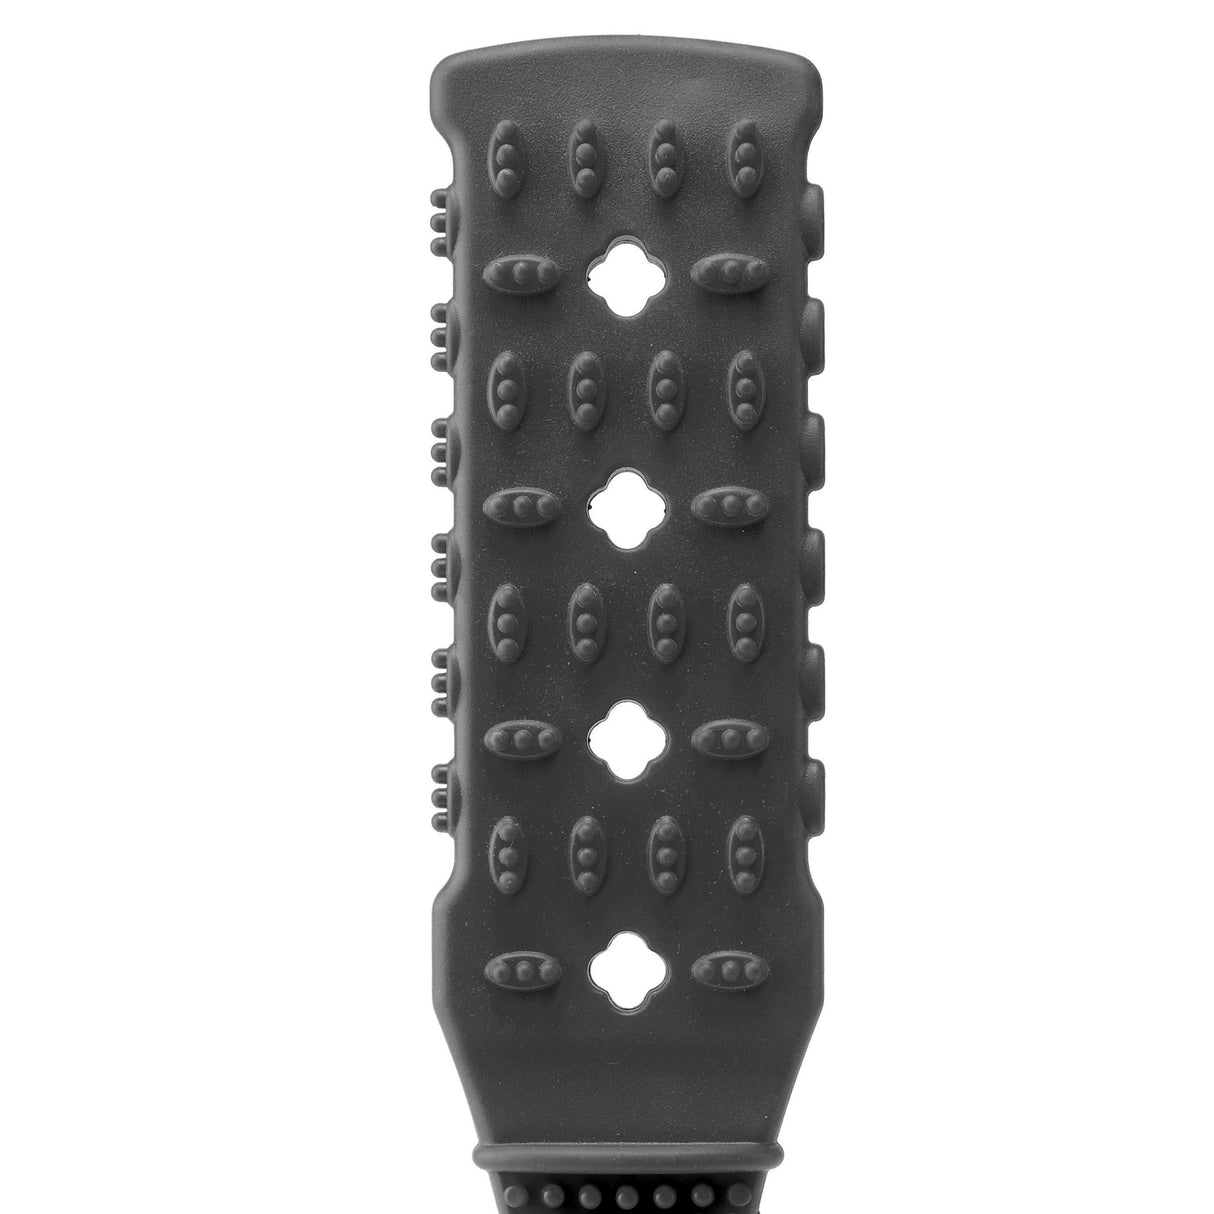 Fetish Fantasy Series Textured Rubber Paddle